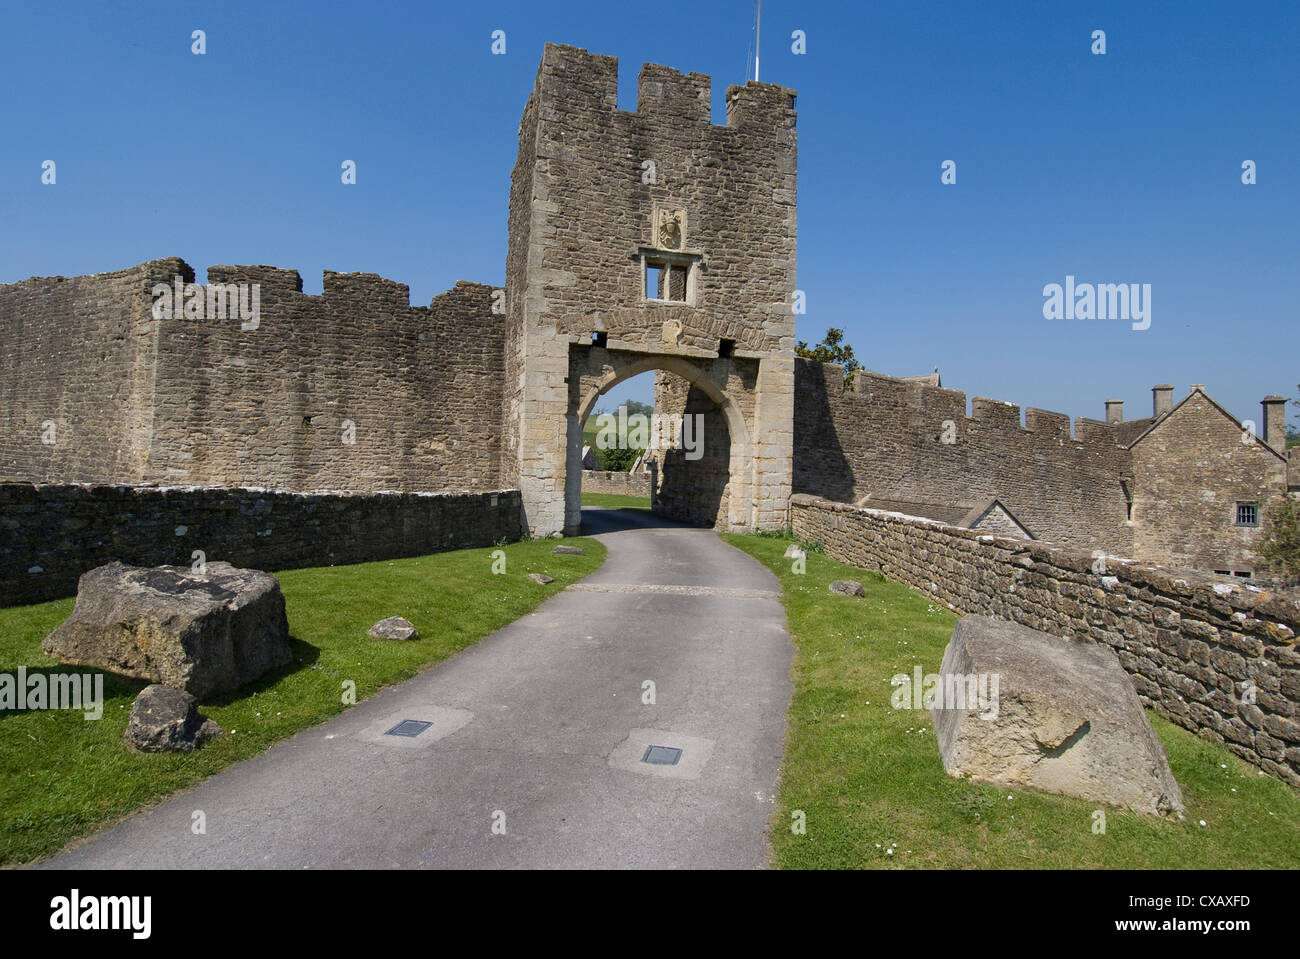 Gatehouse of the 14th century Farleigh Hungerford Castle, Somerset, England, United Kingdom, Europe Stock Photo